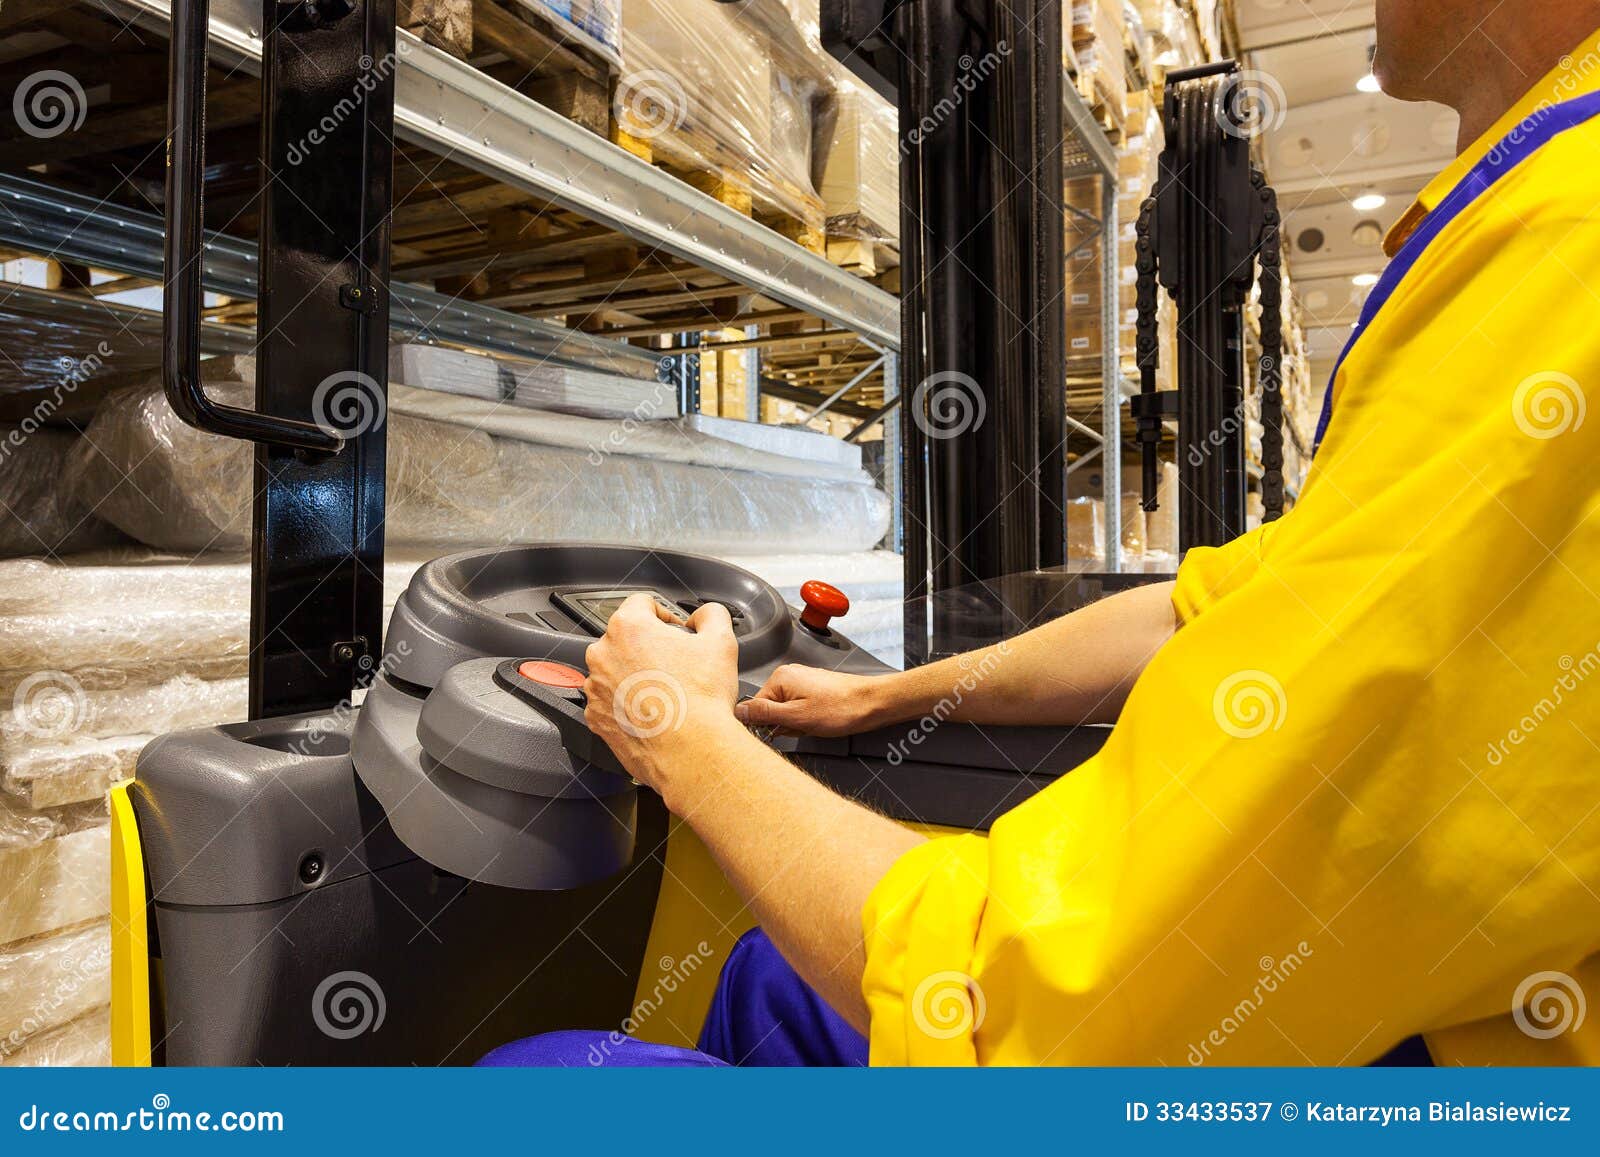 Forklift Operator Stock Image Image Of Force Moving 33433537